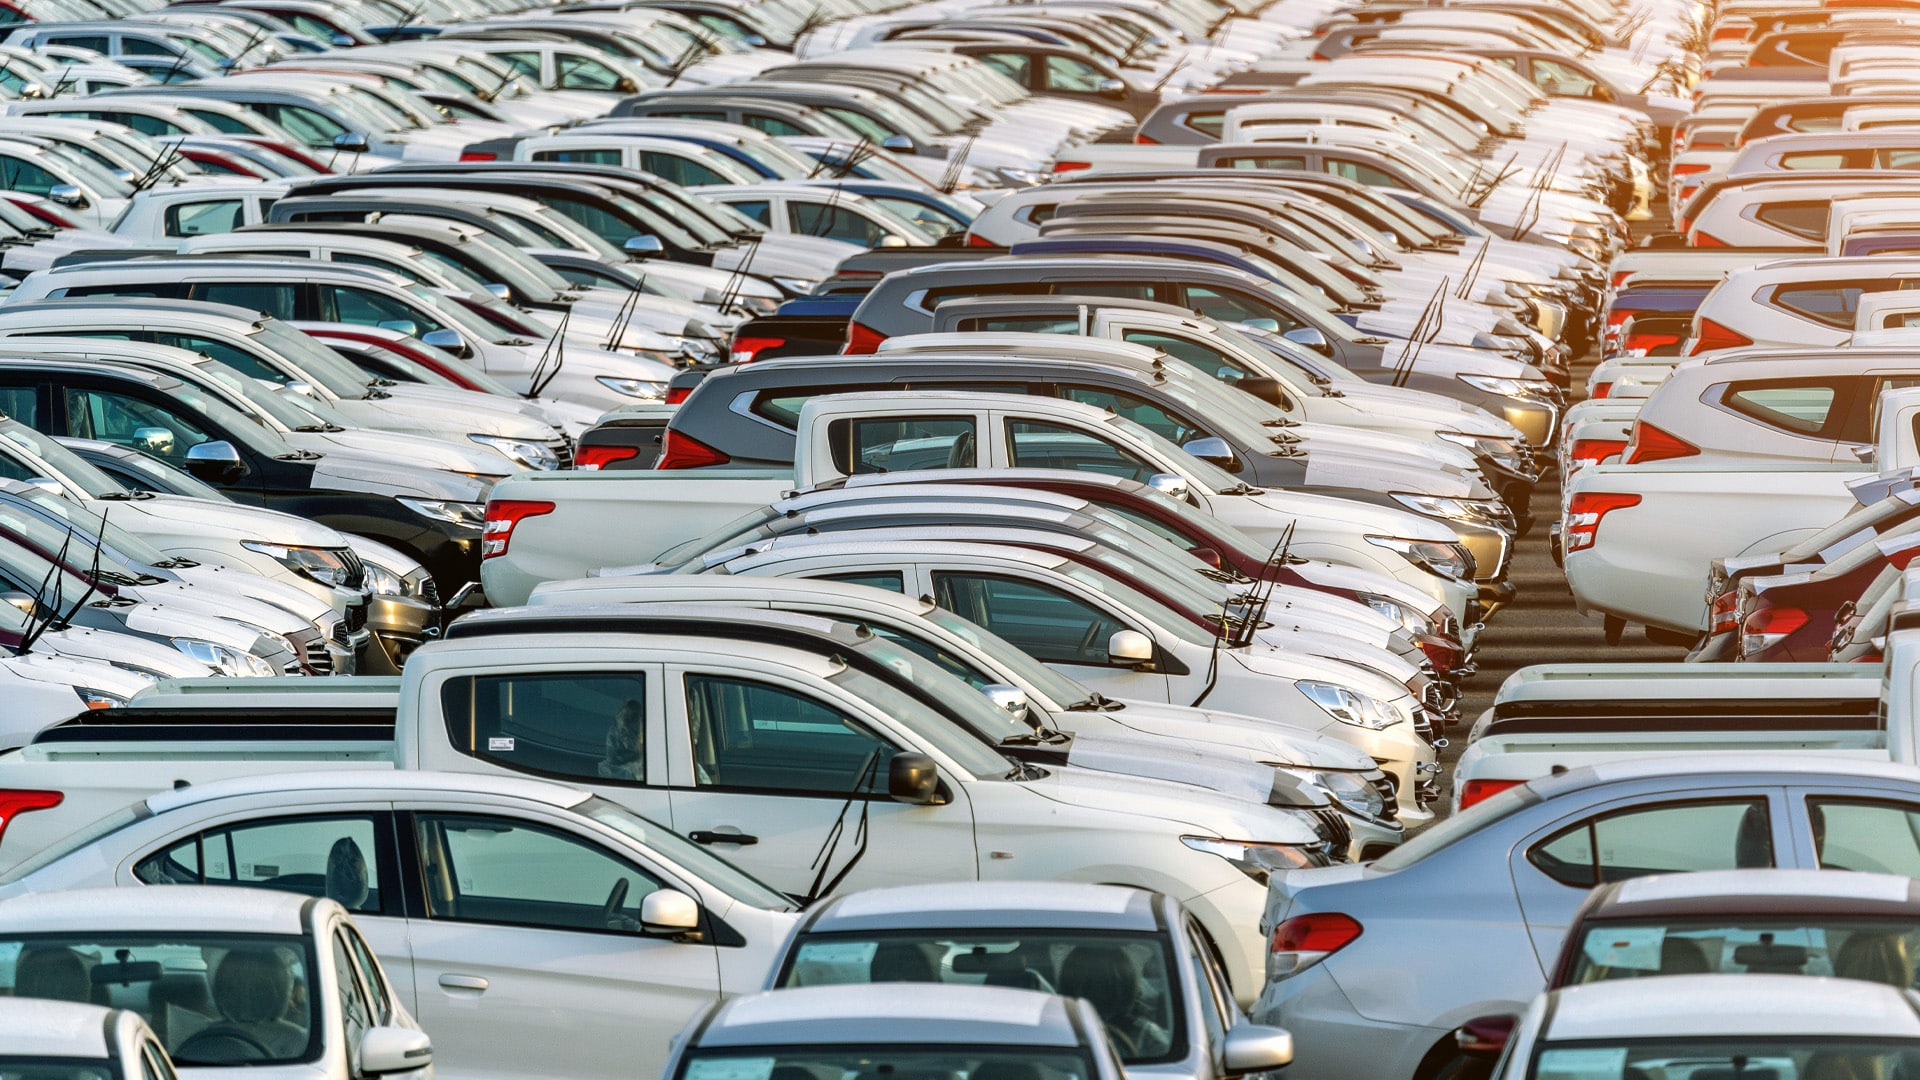 Automobile retail sales rise 14 pc in January to cross 18 lakh unit mark: FADA